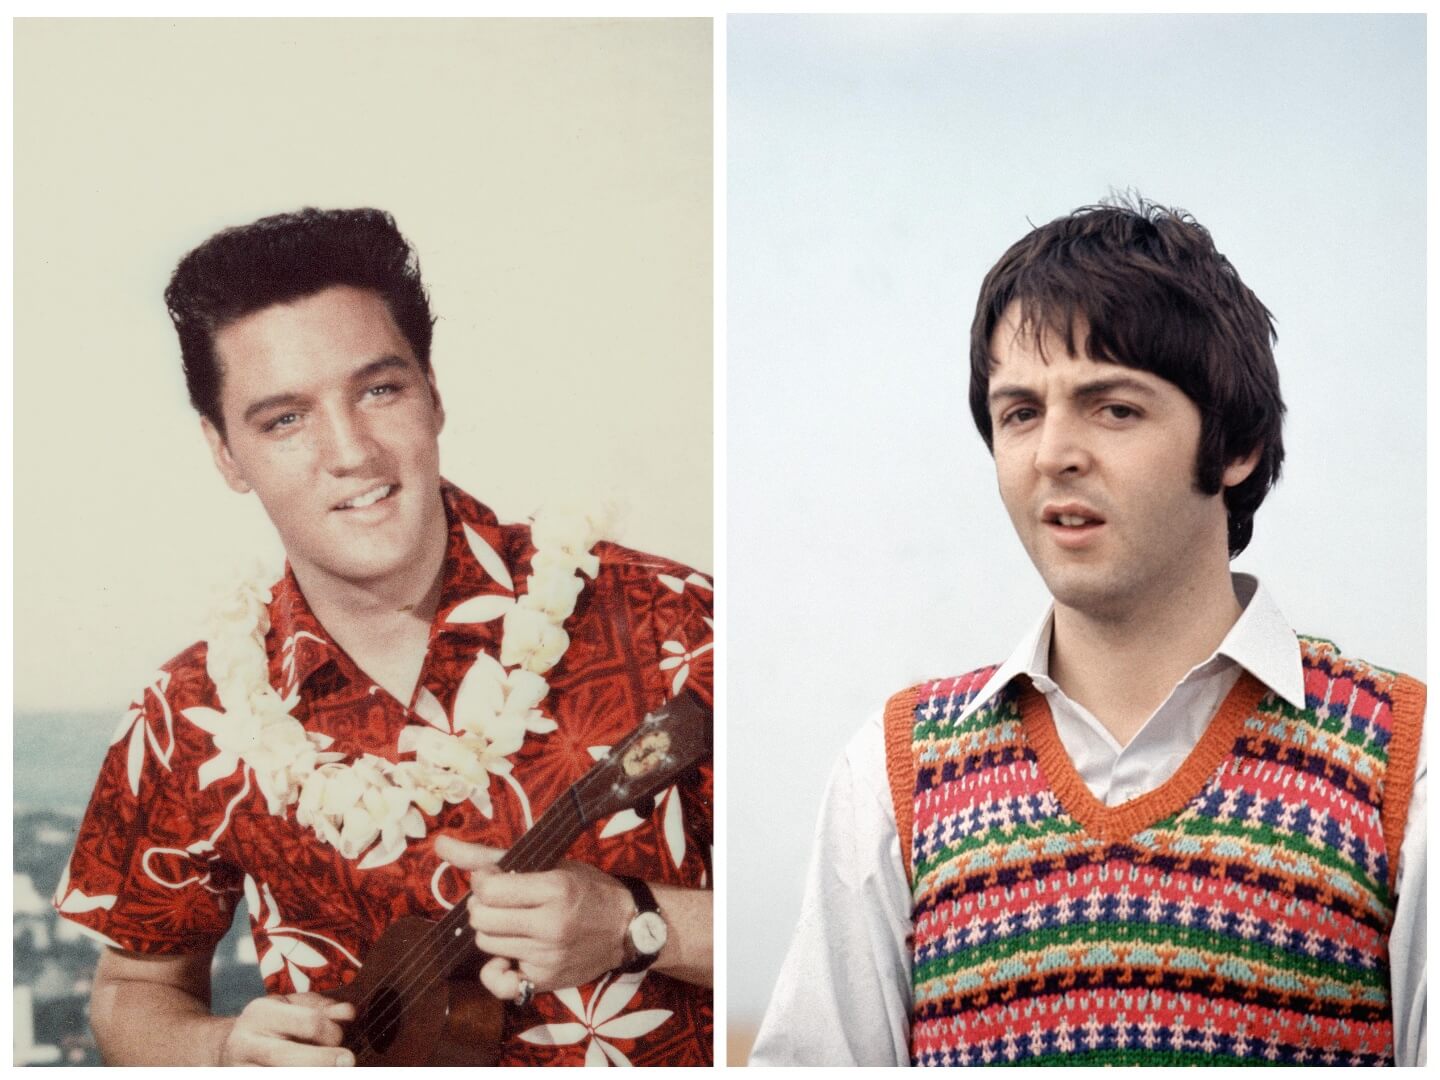 Elvis Presley wears a red shirt and a white lei. He holds a ukulele. Paul McCartney wears a white collared shirt and colorful sweater vest.